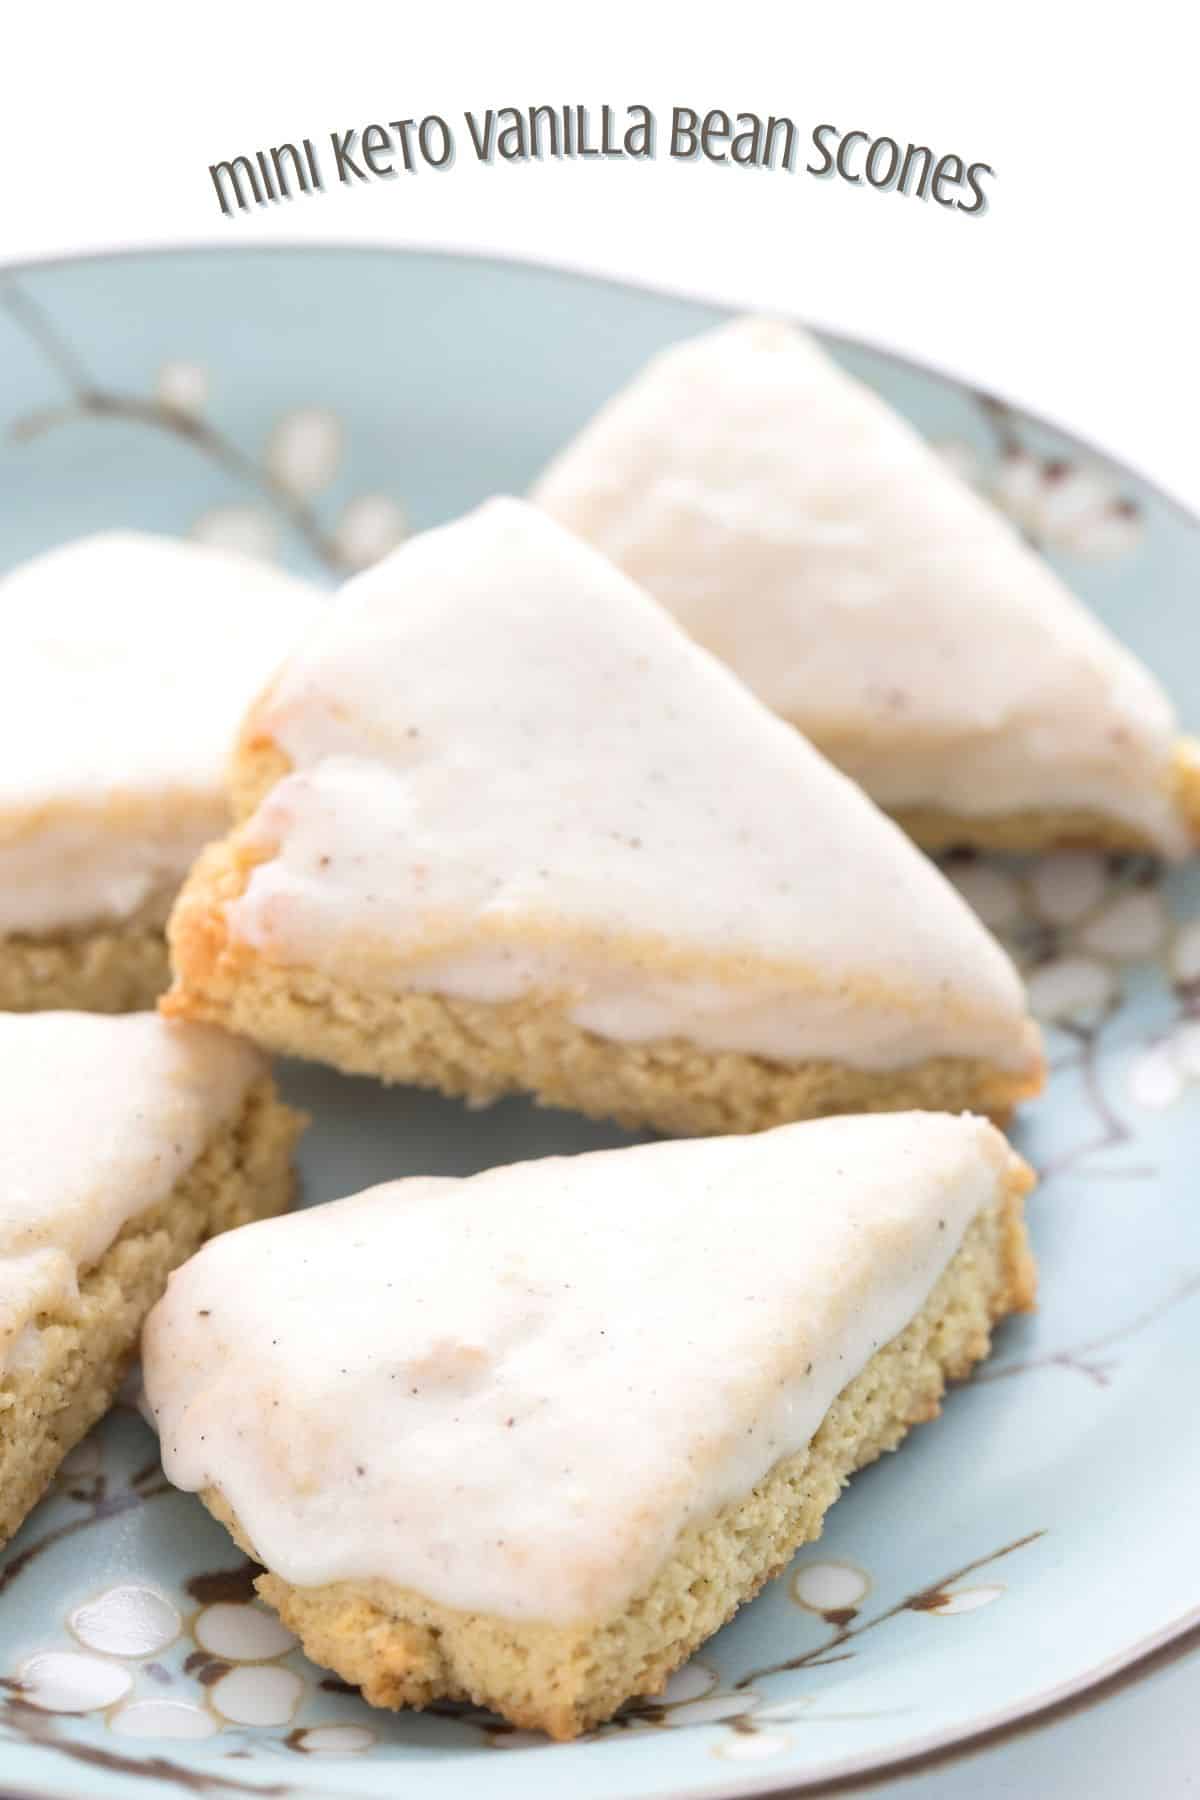 Titled image of a pile of mini keto vanilla bean scones on a blue patterned plate.